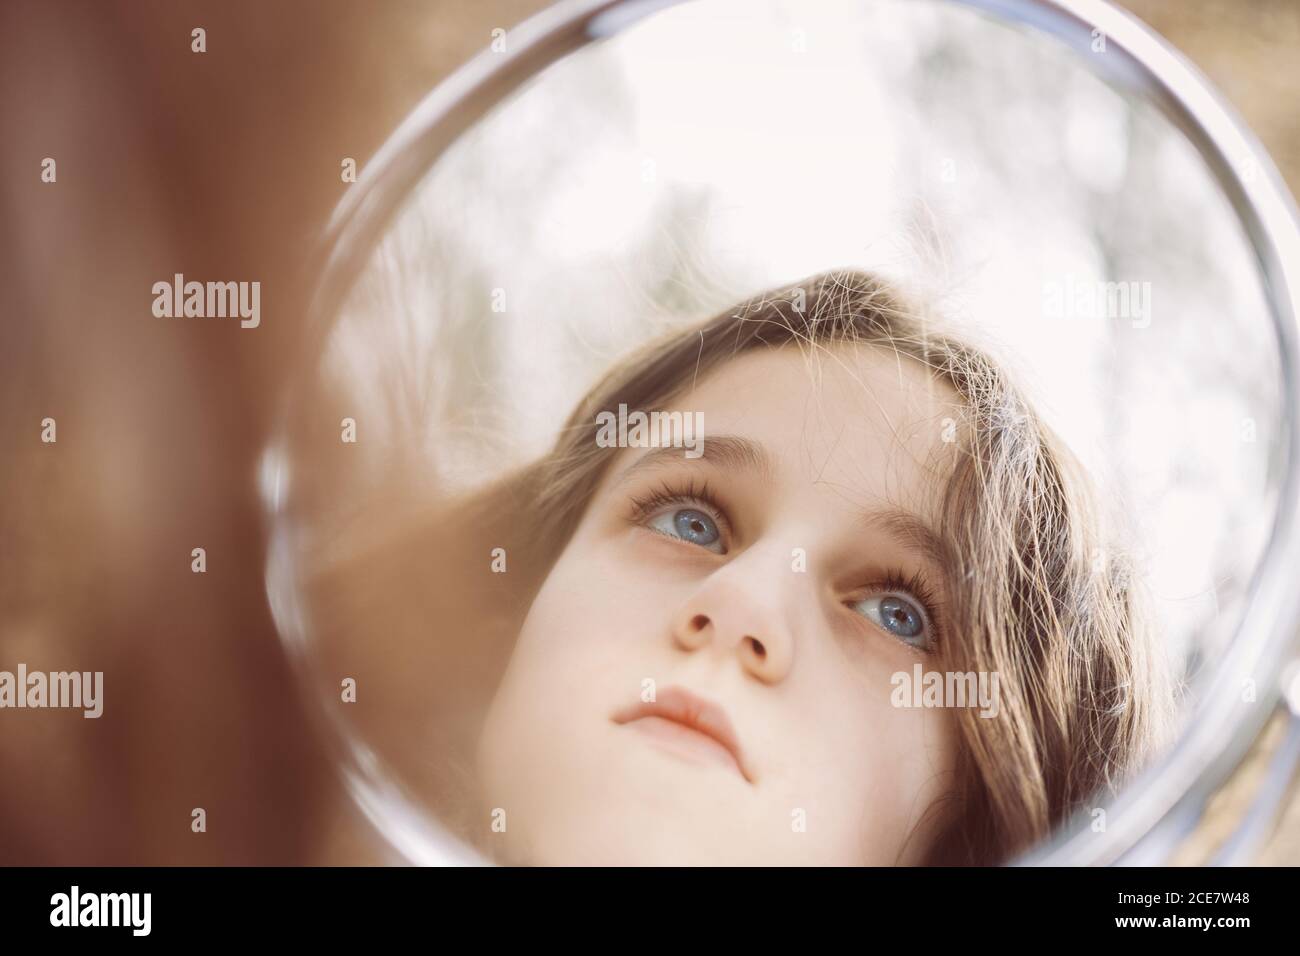 Wistful child with blue eyes and brown hair looking away while reflecting in round mirror in apartment in daylight Stock Photo